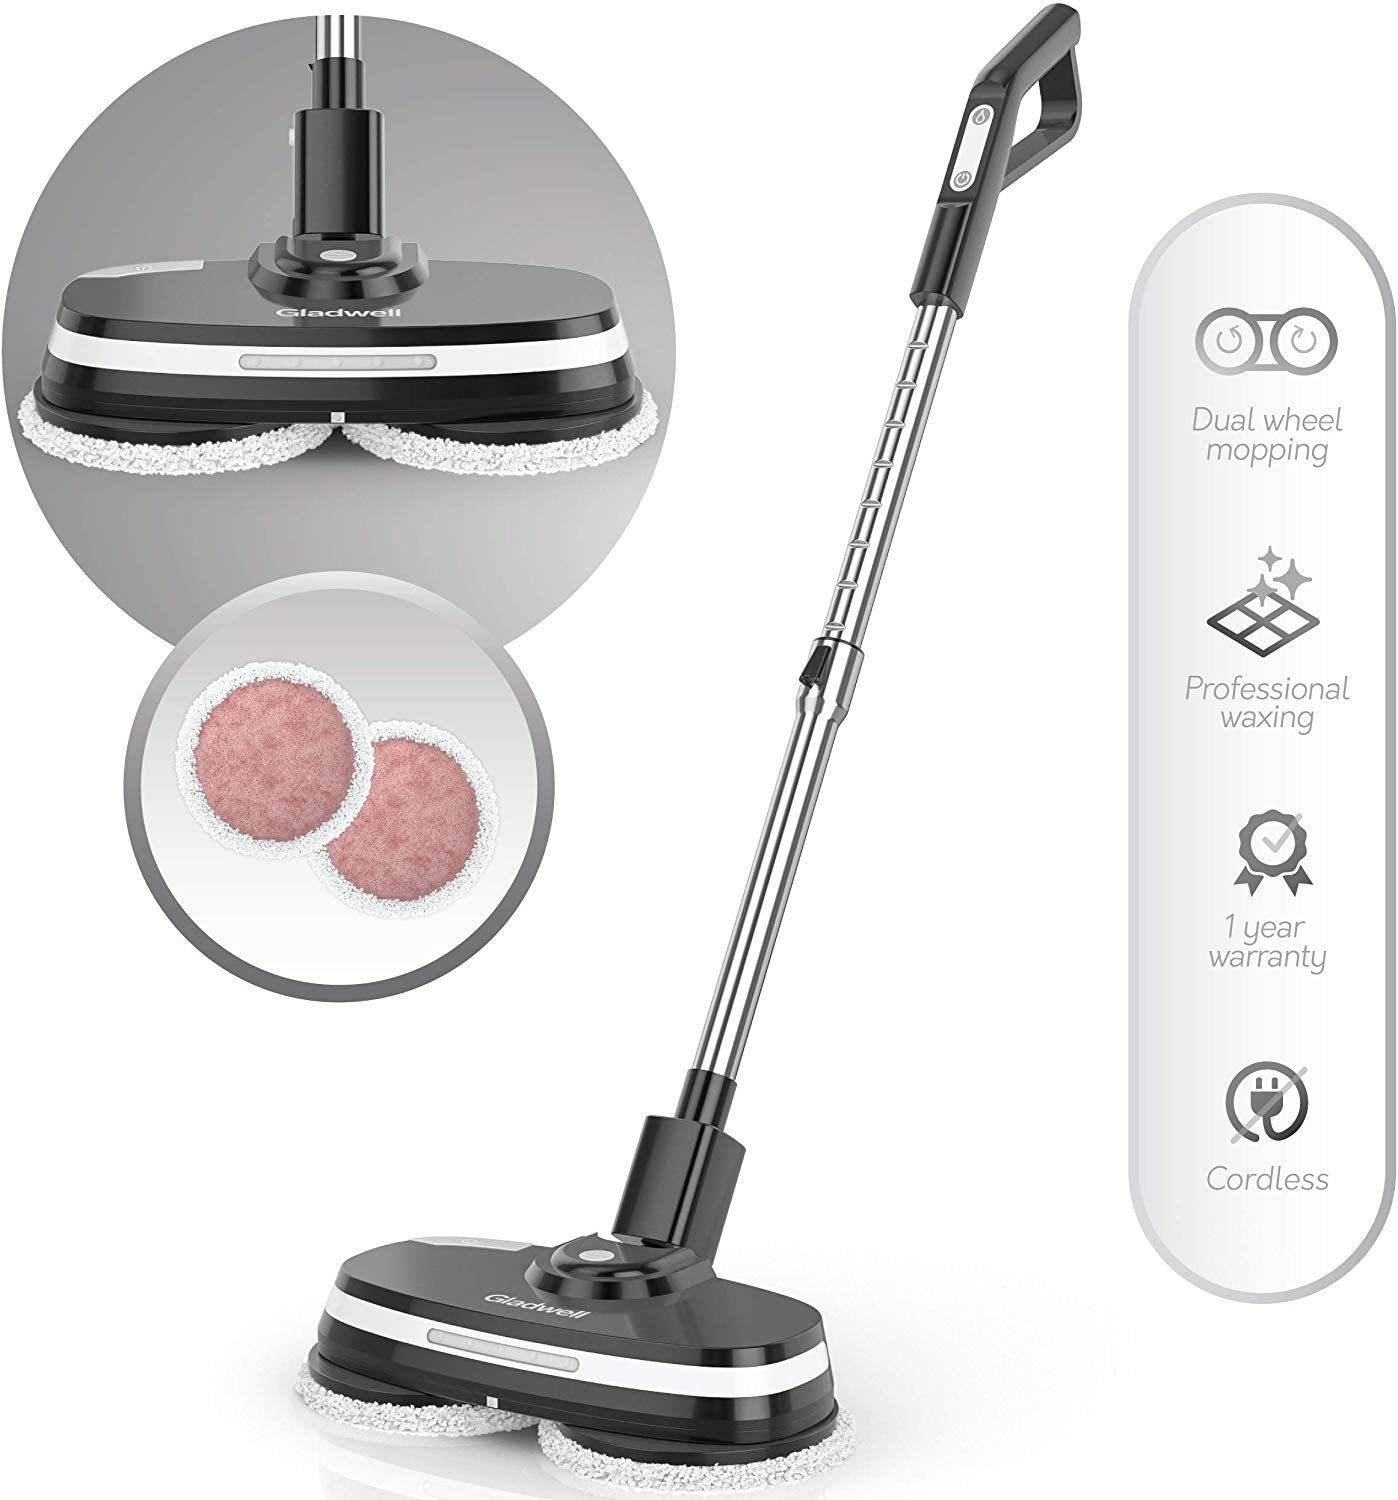 Coaster Cordless Electric Mop – Gladwell